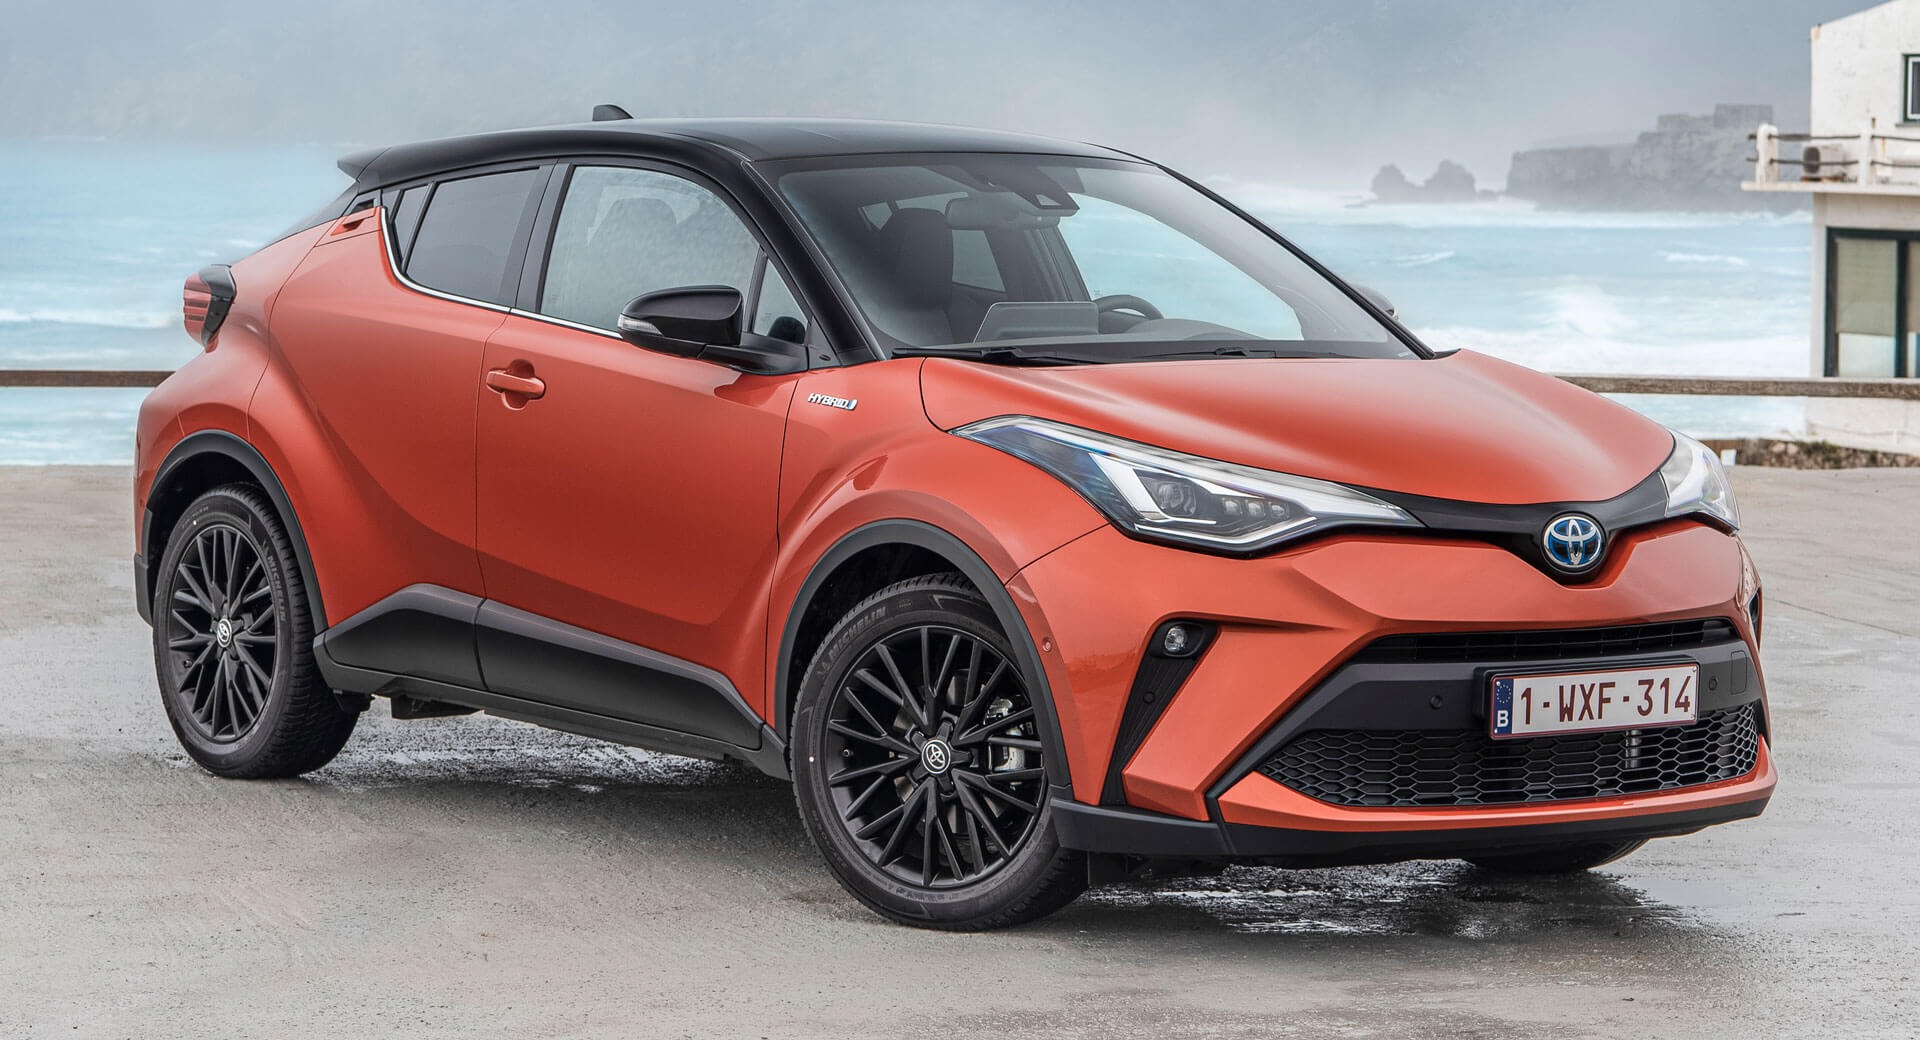 2020 Toyota CHR Launched In The UK, Gets LimitedRun